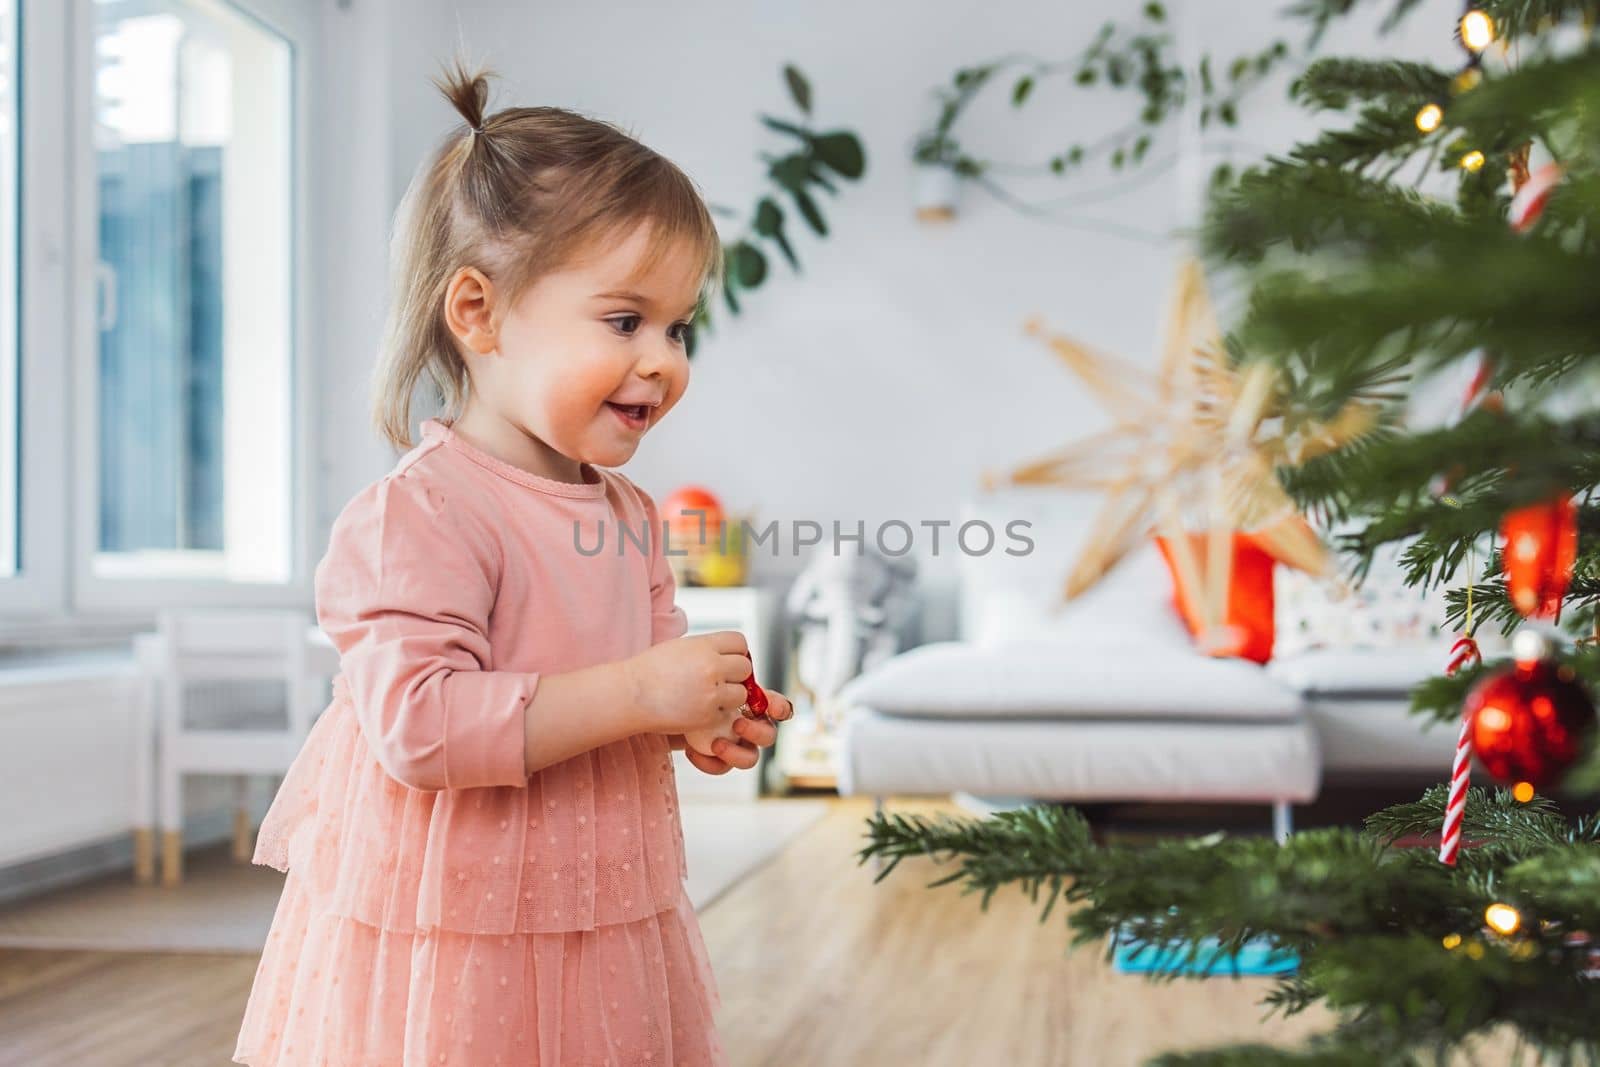 Smiling baby girl in pink dress deciding where to put the ornament she's holding in her arms by VisualProductions